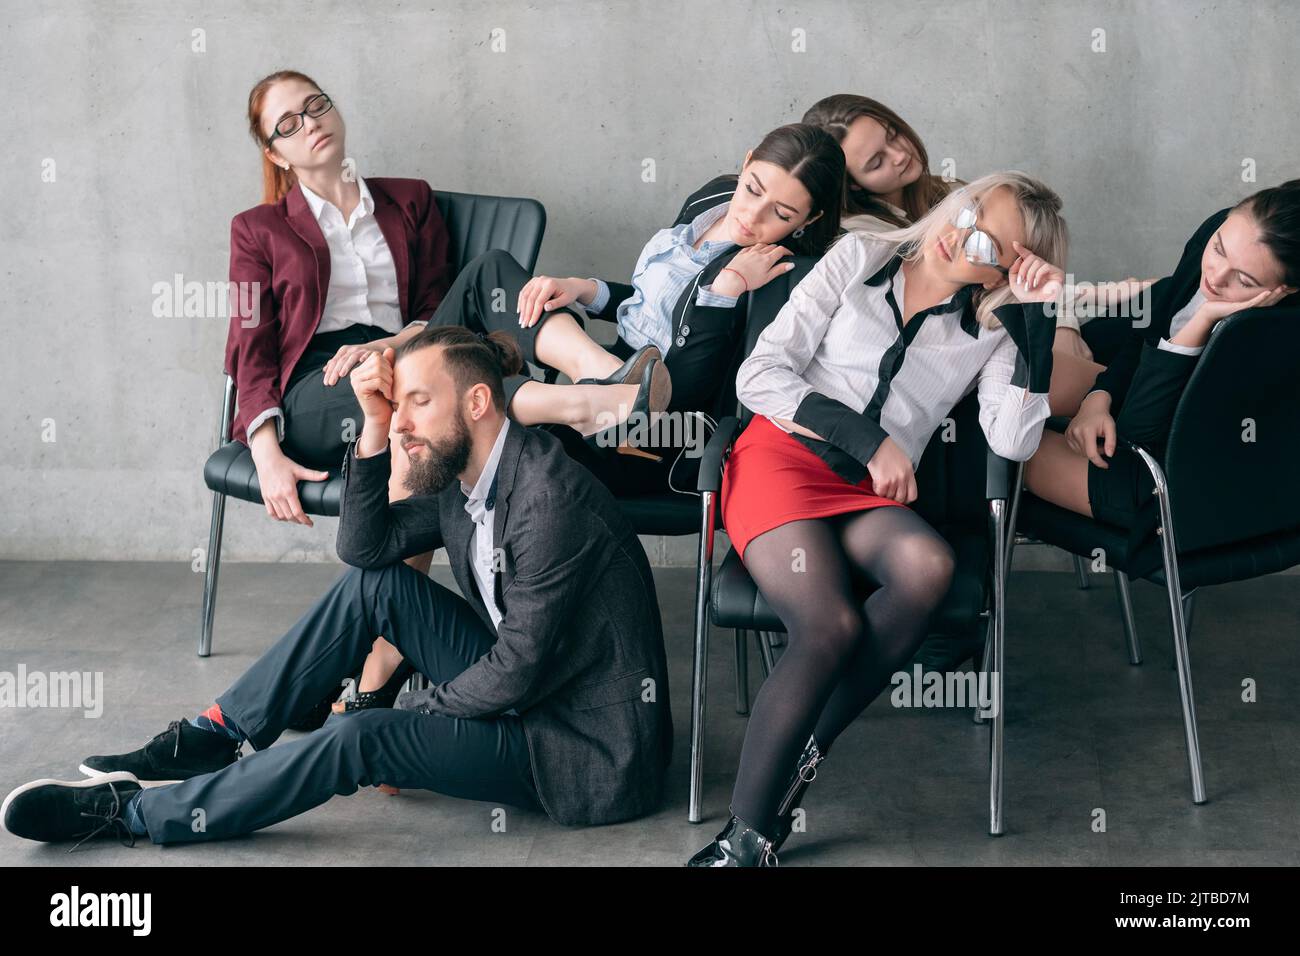 annual audit overworking fatigue managers sleep Stock Photo